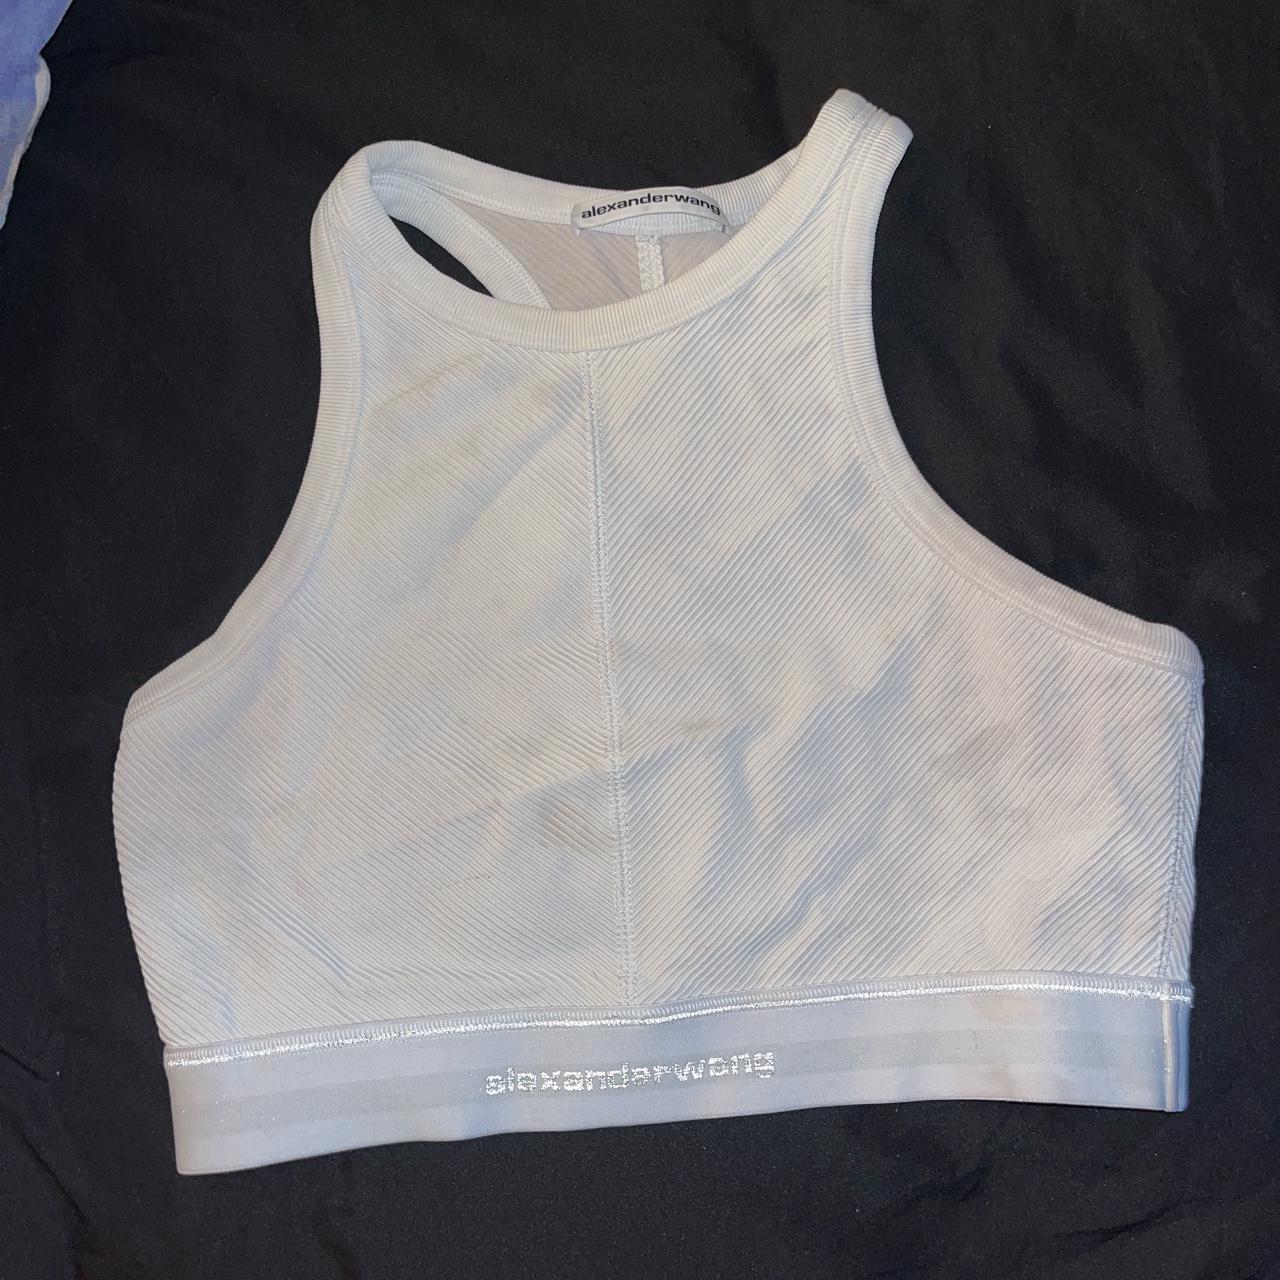 new all in motion activewear crop sleeveless top - Depop